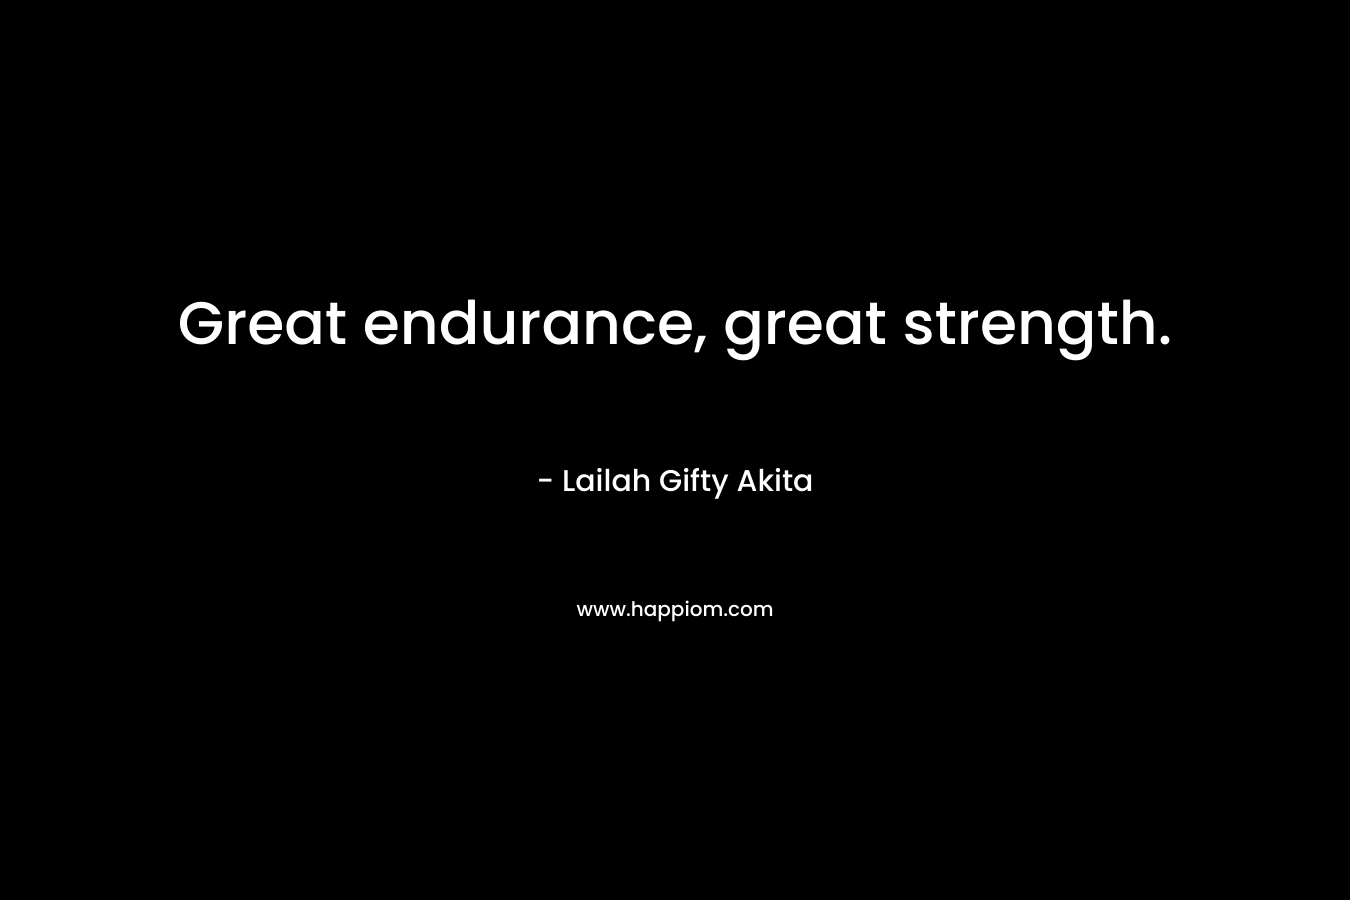 Great endurance, great strength.